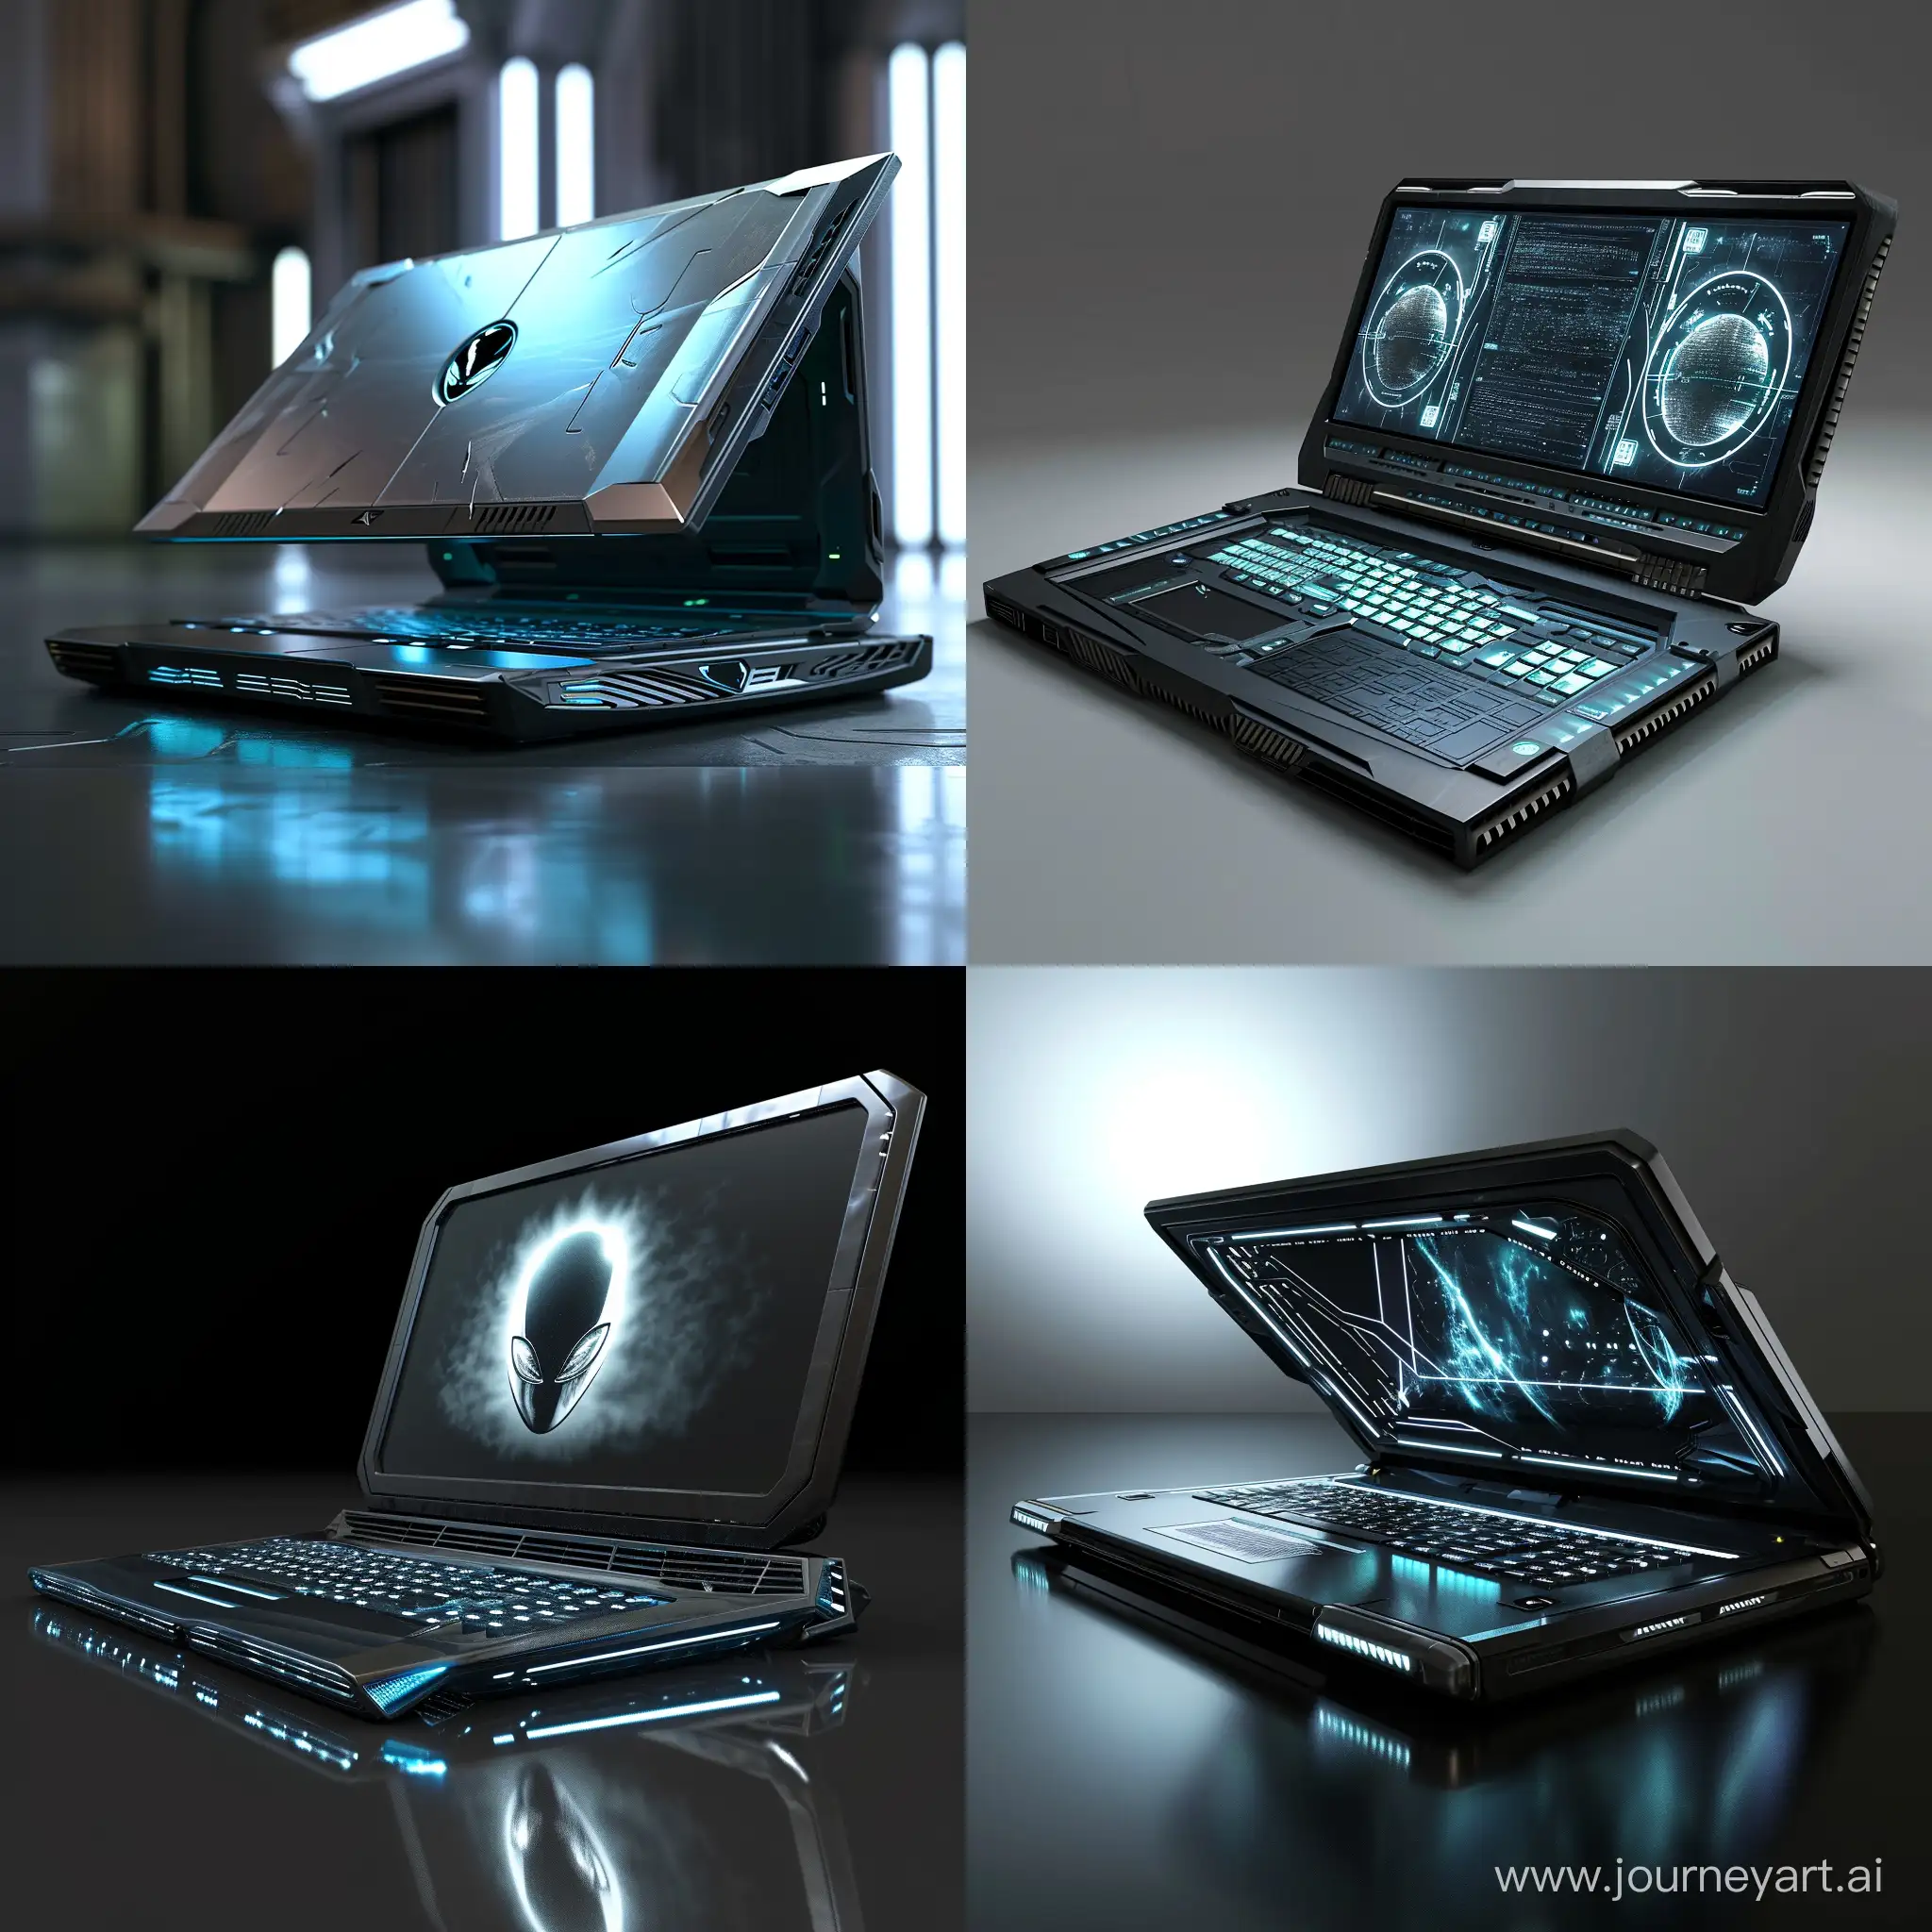 Futuristic-Alien-Laptop-with-6-Variations-Hightech-Device-Design